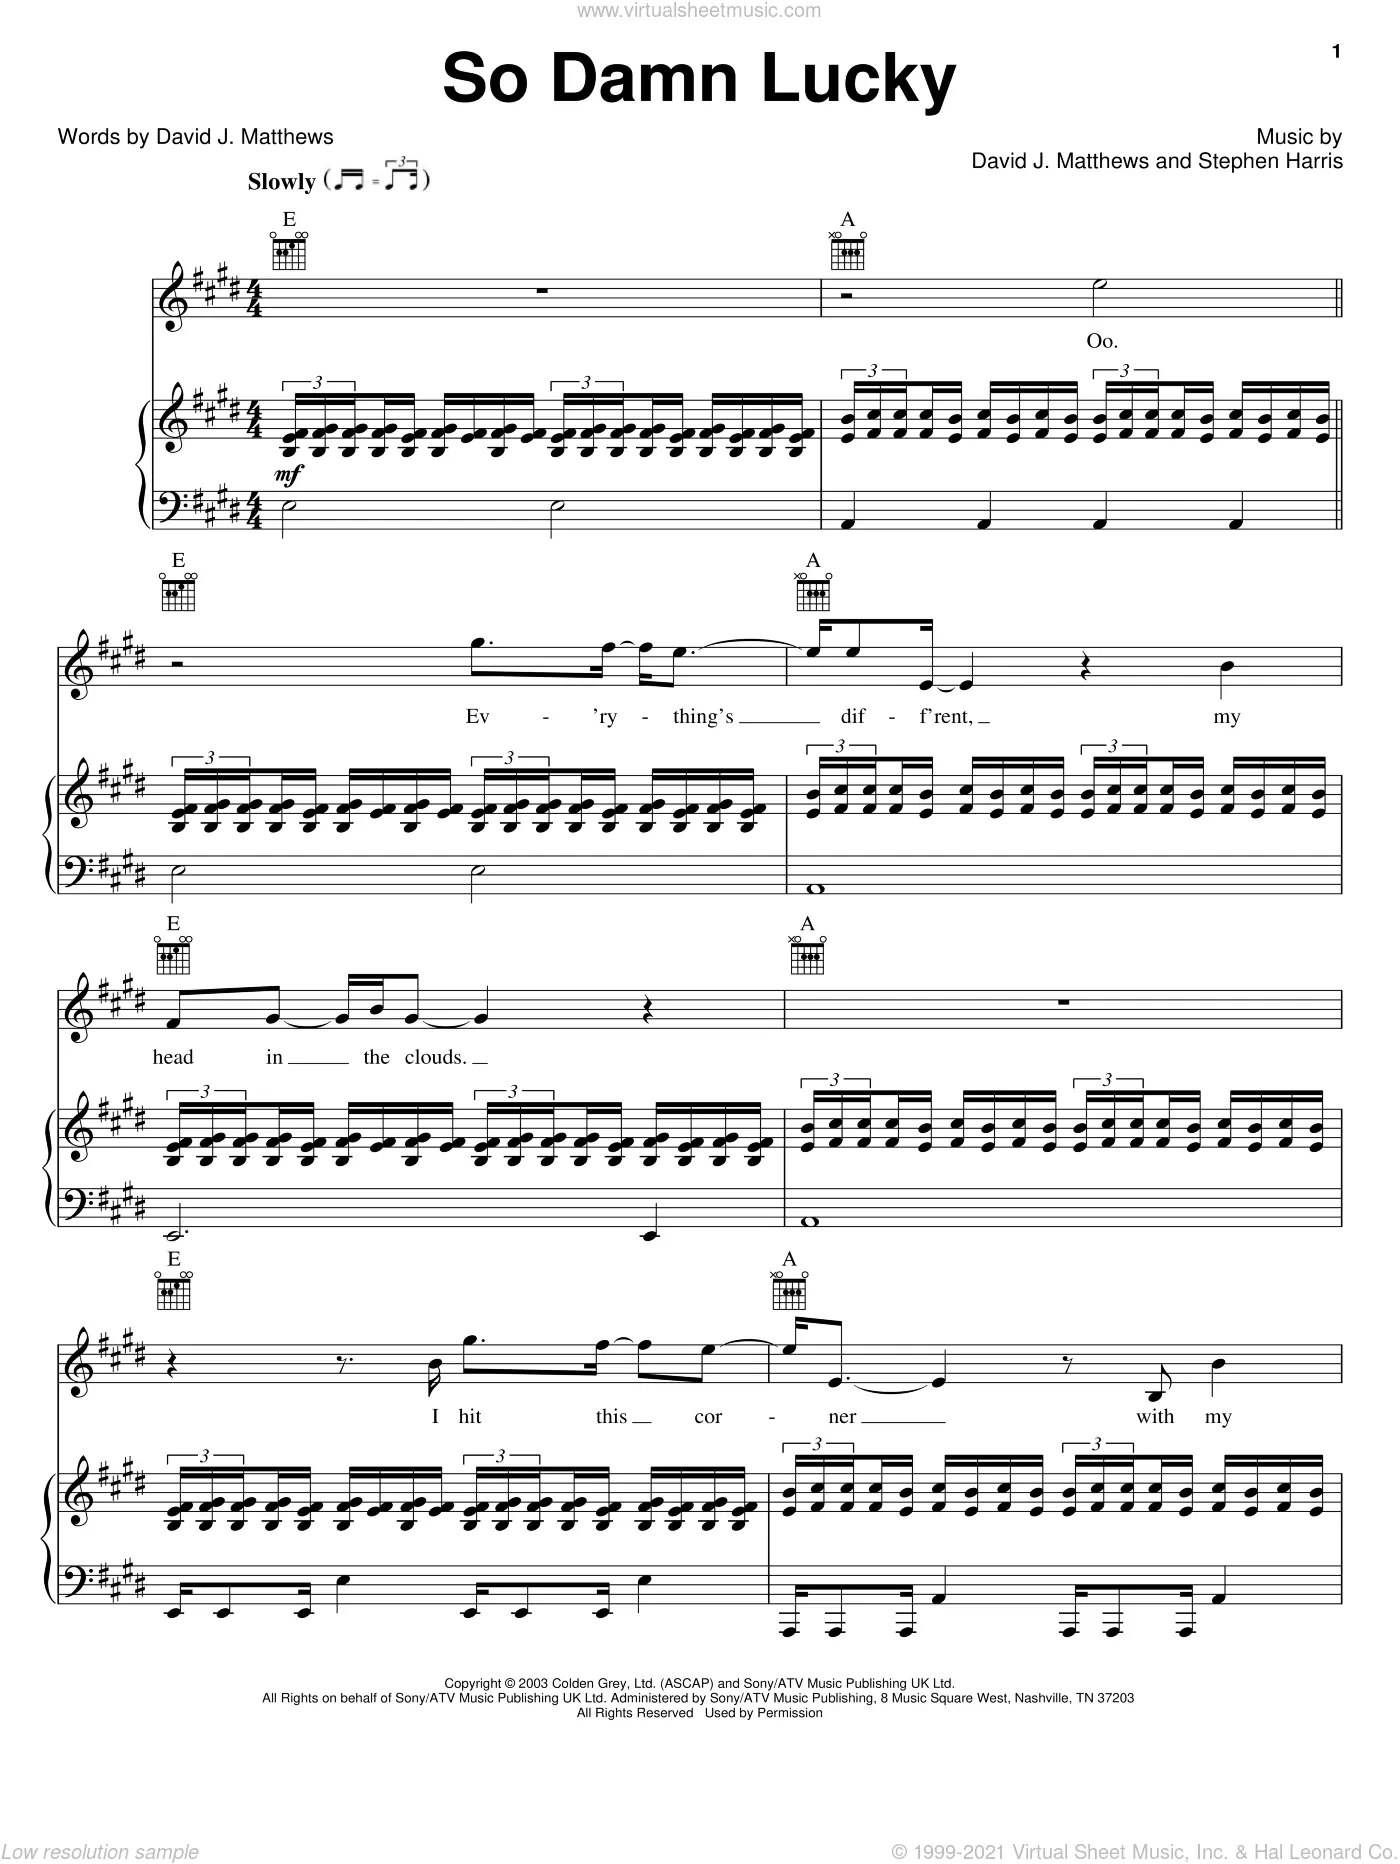 When Daisies Pied Sheet music for Piano, Voice (other) (Piano-Voice)